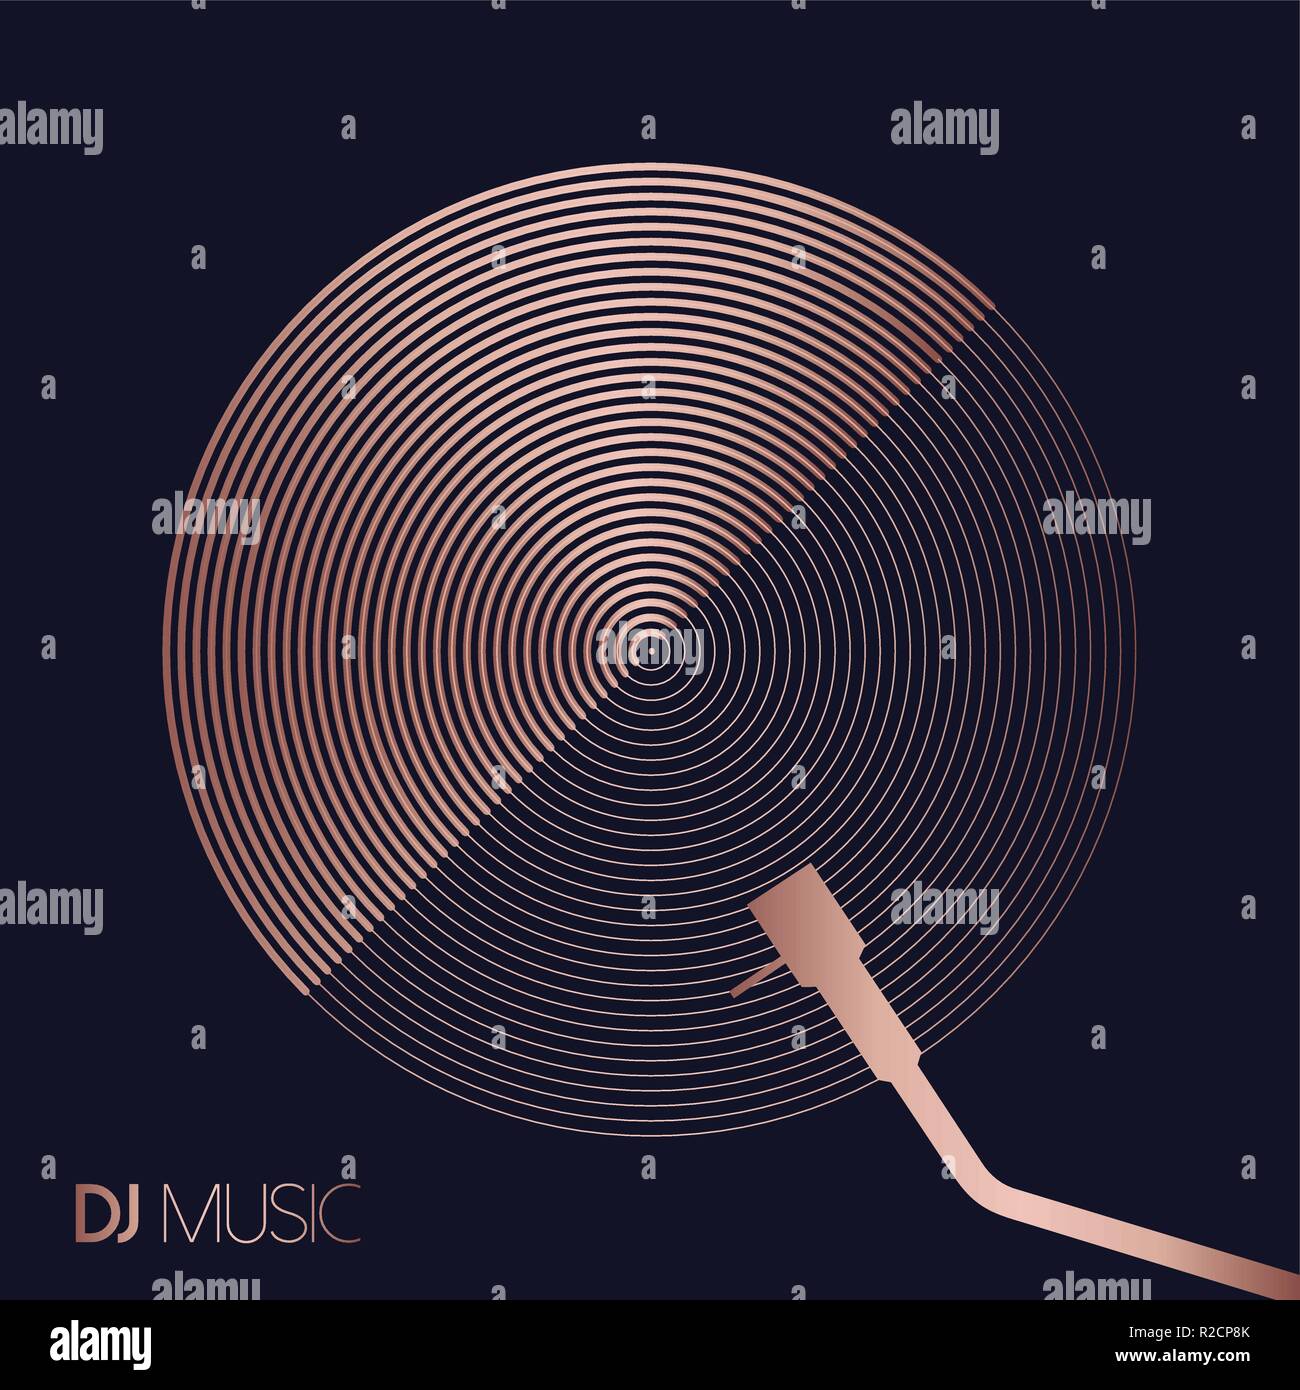 DJ music concept in geometric line art style with modern vinyl record design in luxury copper color. Stock Vector